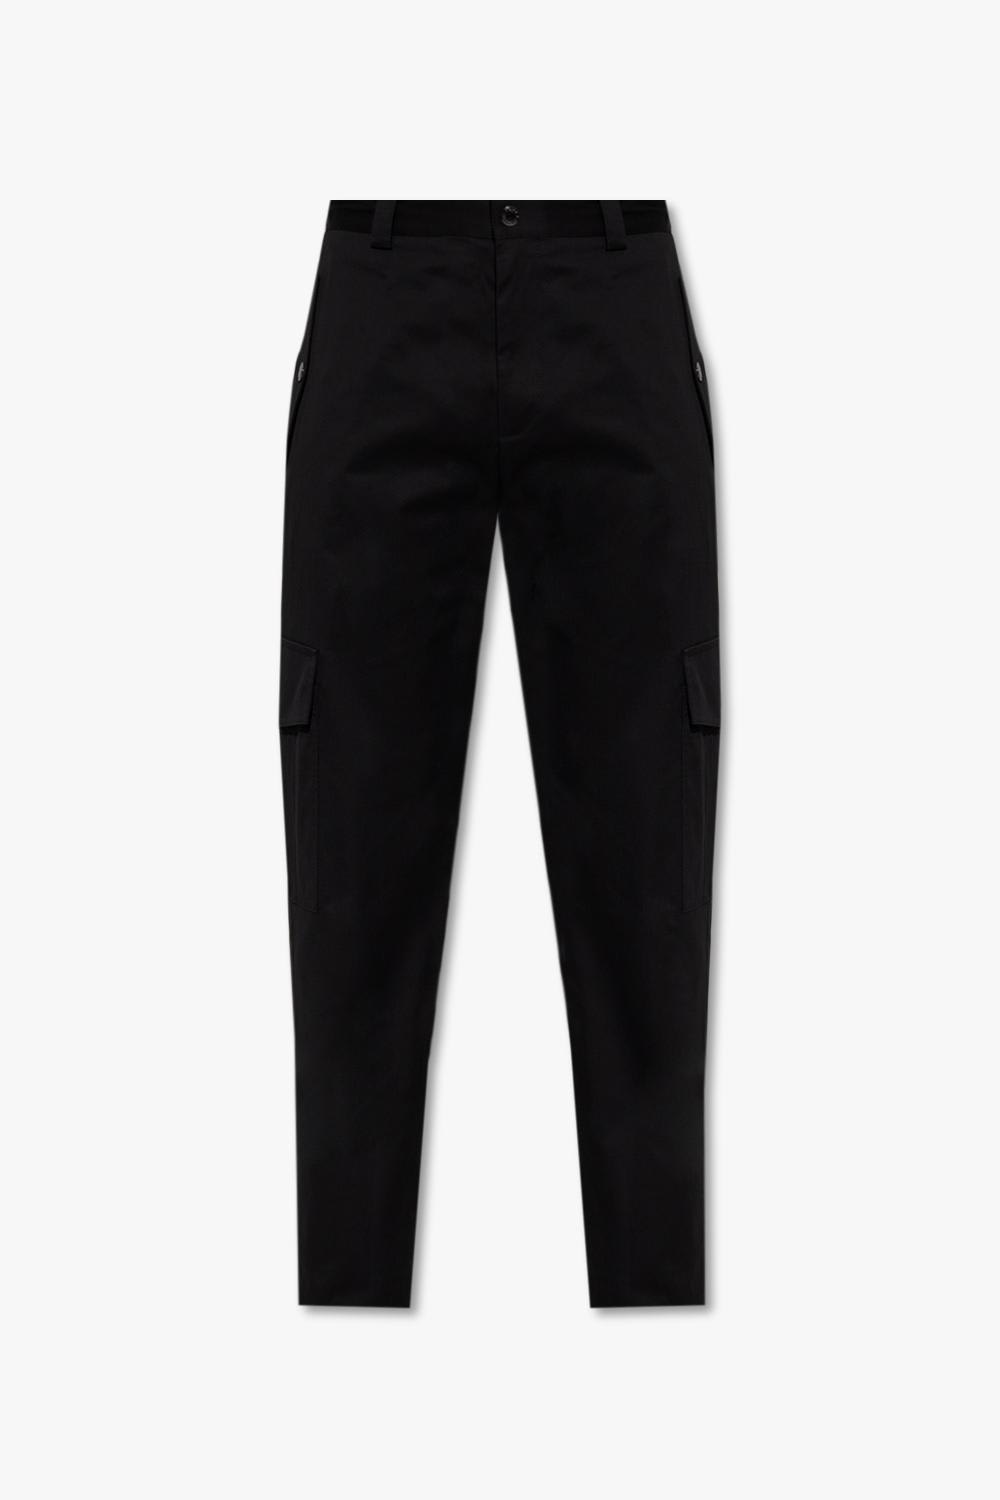 Dolce & Gabbana Trousers With Pockets In Black